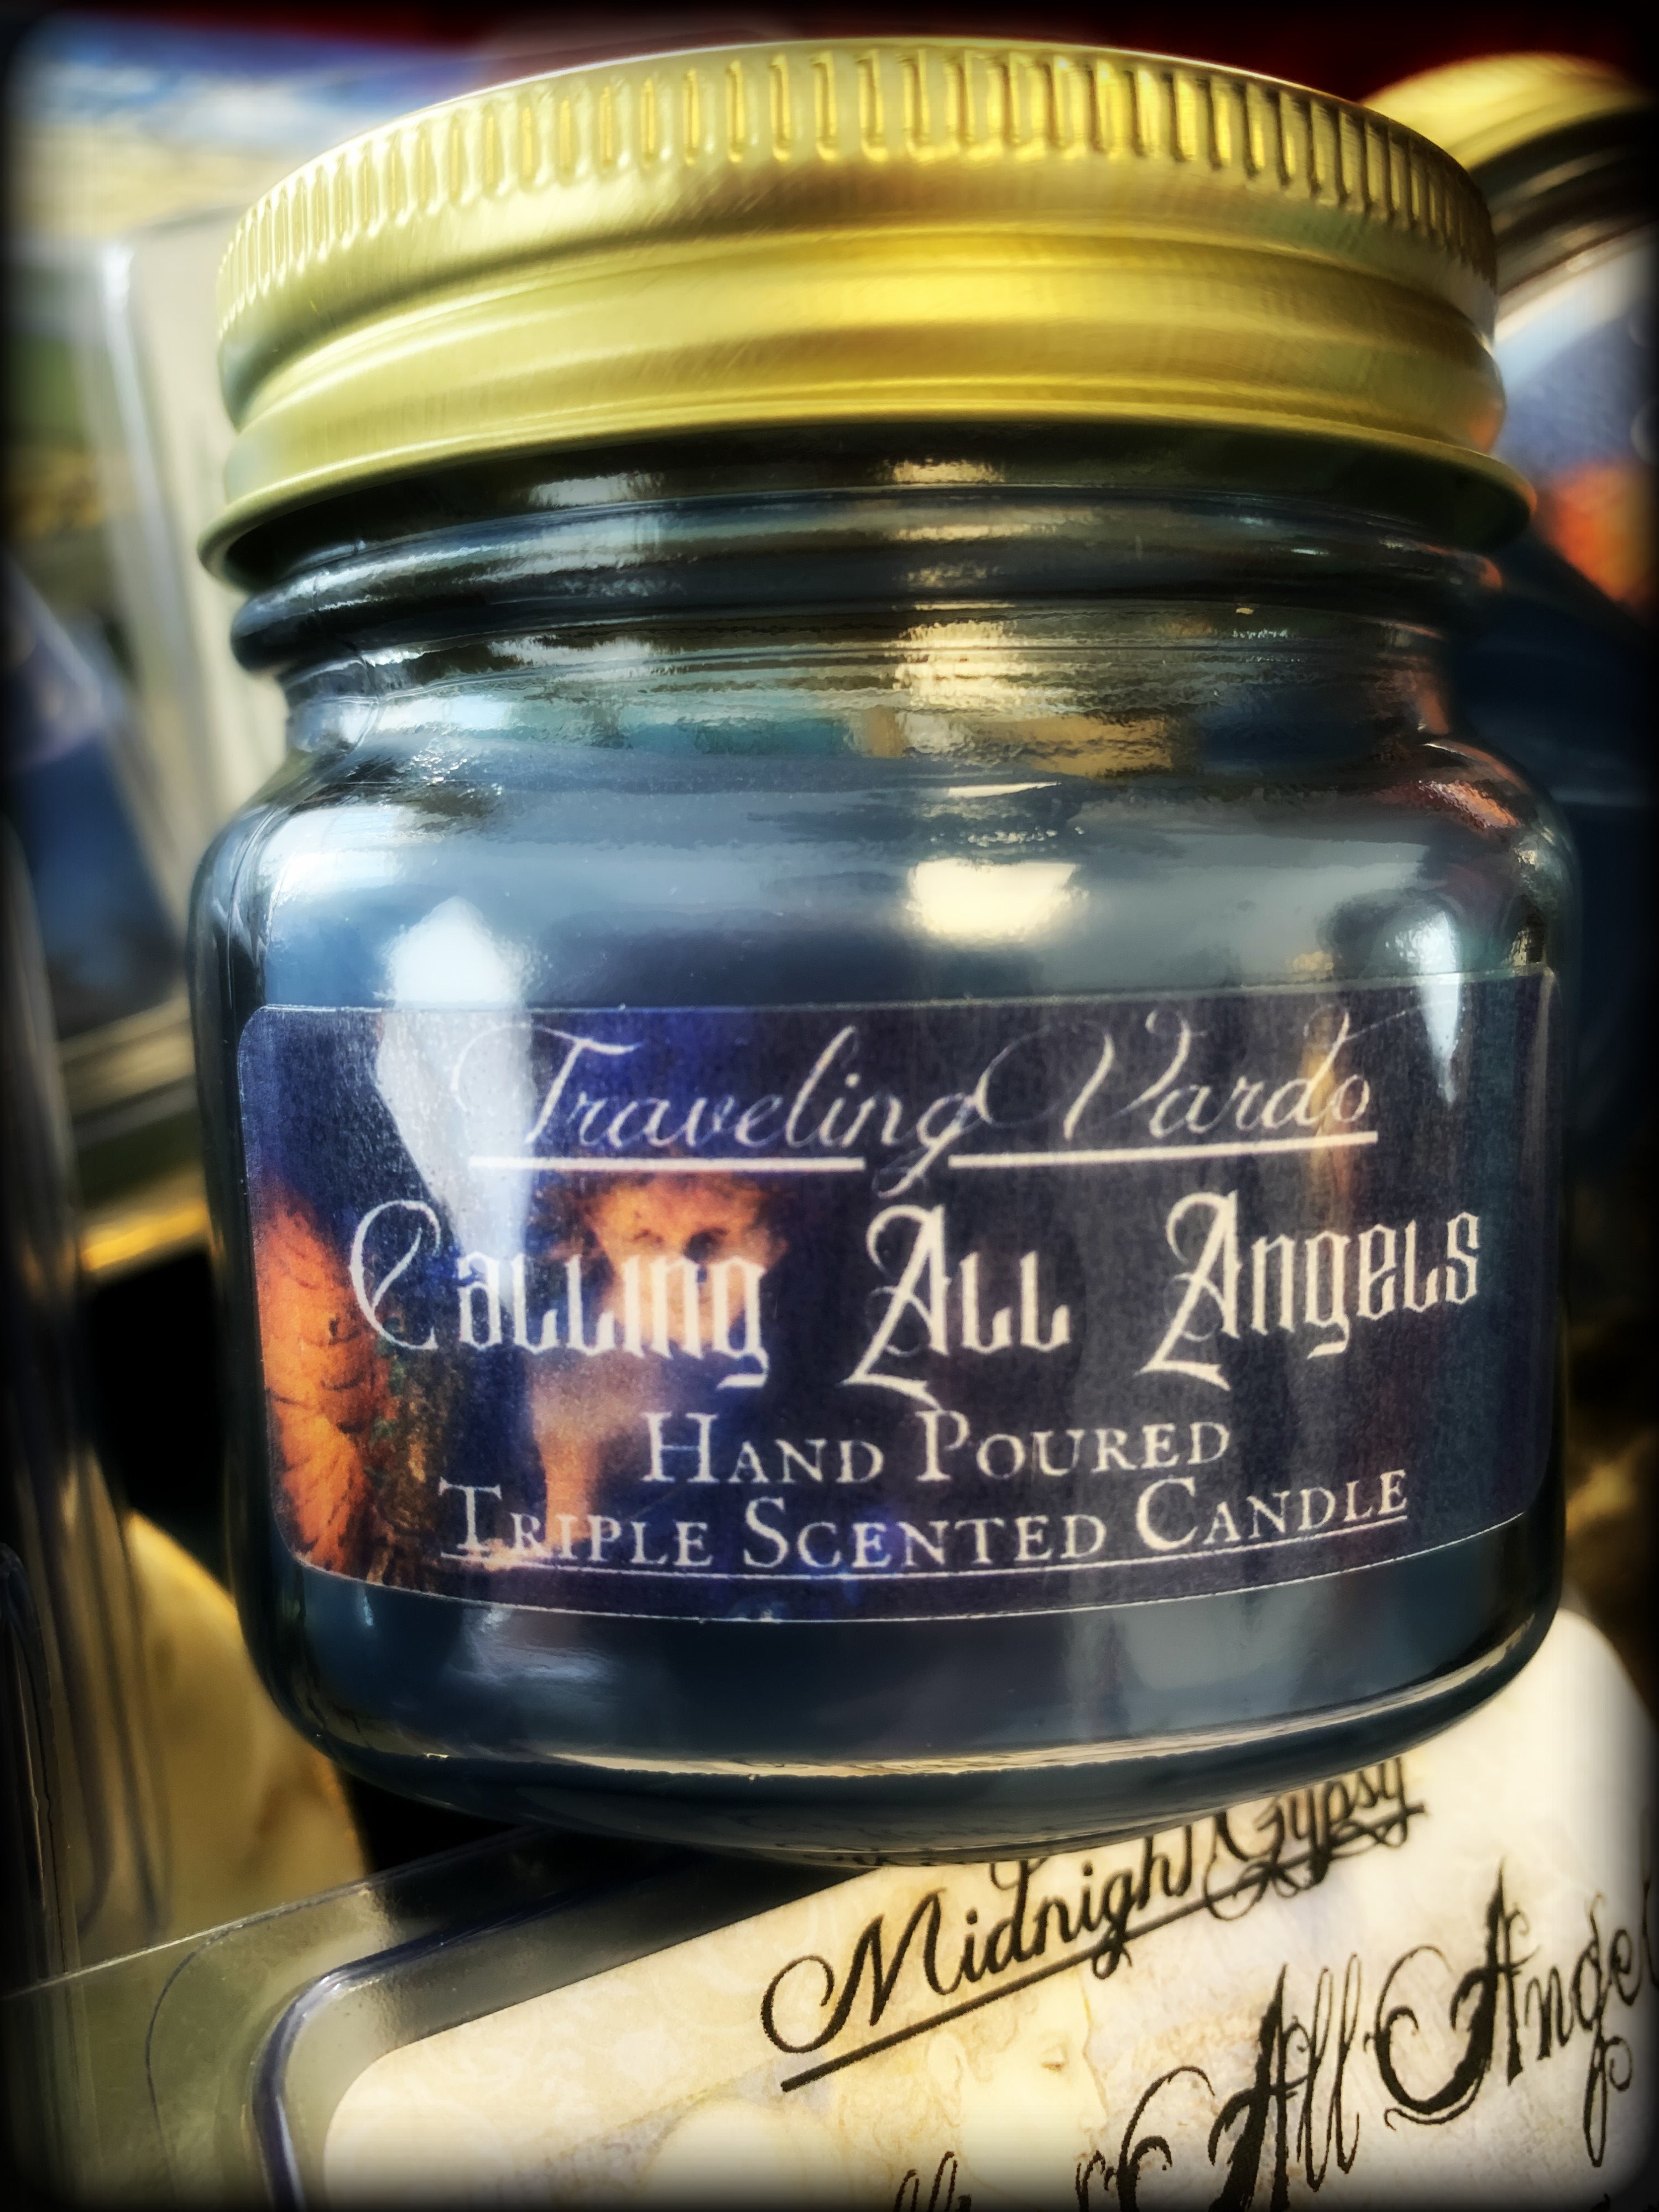 CALLING ALL ANGELS ~ Hand Poured Highly Fragranced Candle